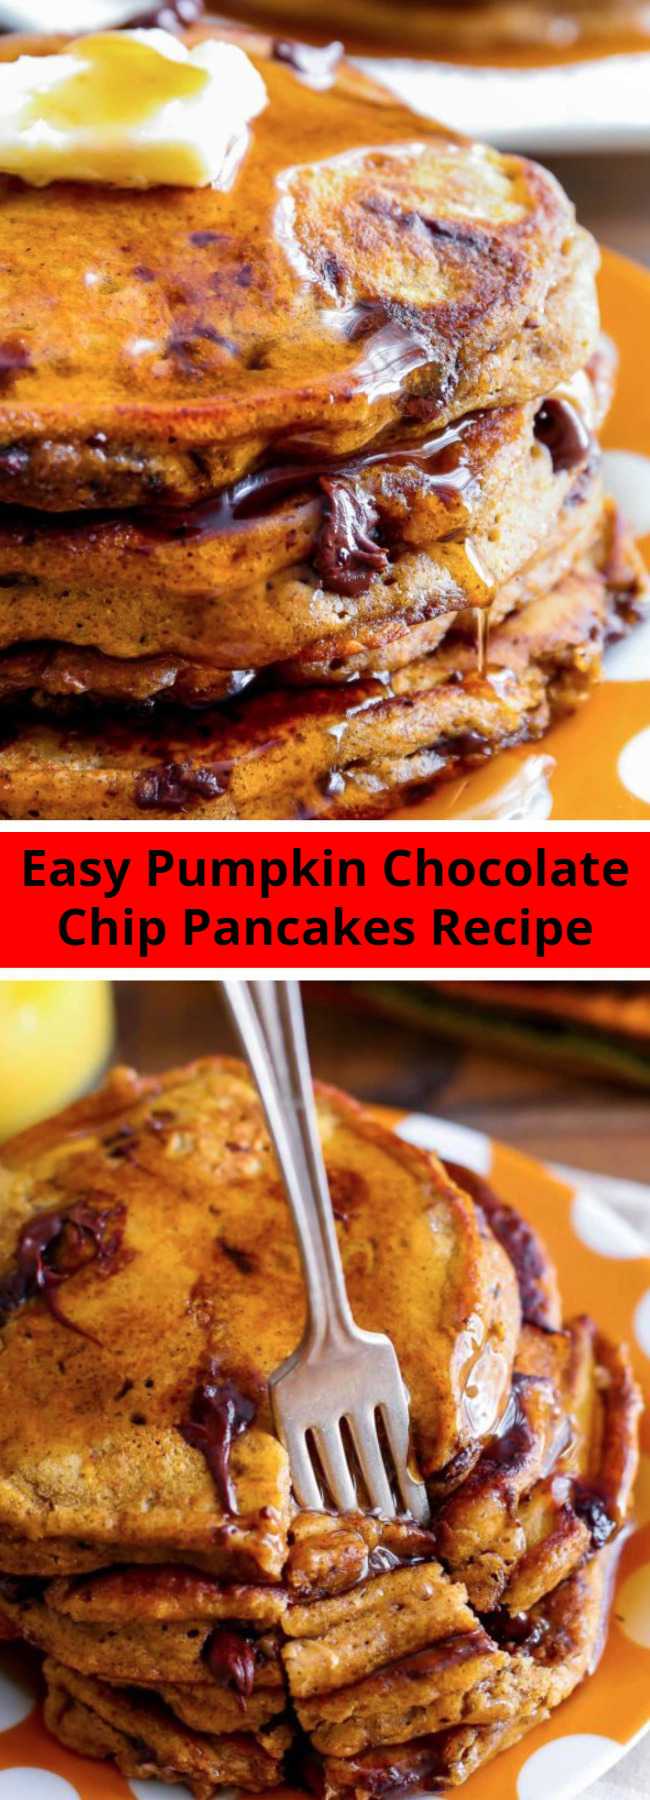 Easy Pumpkin Chocolate Chip Pancakes Recipe - These pumpkin chocolate chip pancakes are the epitome of a cozy fall breakfast! Moist and fluffy, they’re wonderful with a pat of butter and a cascade of maple syrup. You’ll love starting fall mornings with a happy stack of these thick, and flavorful pumpkin pancakes.